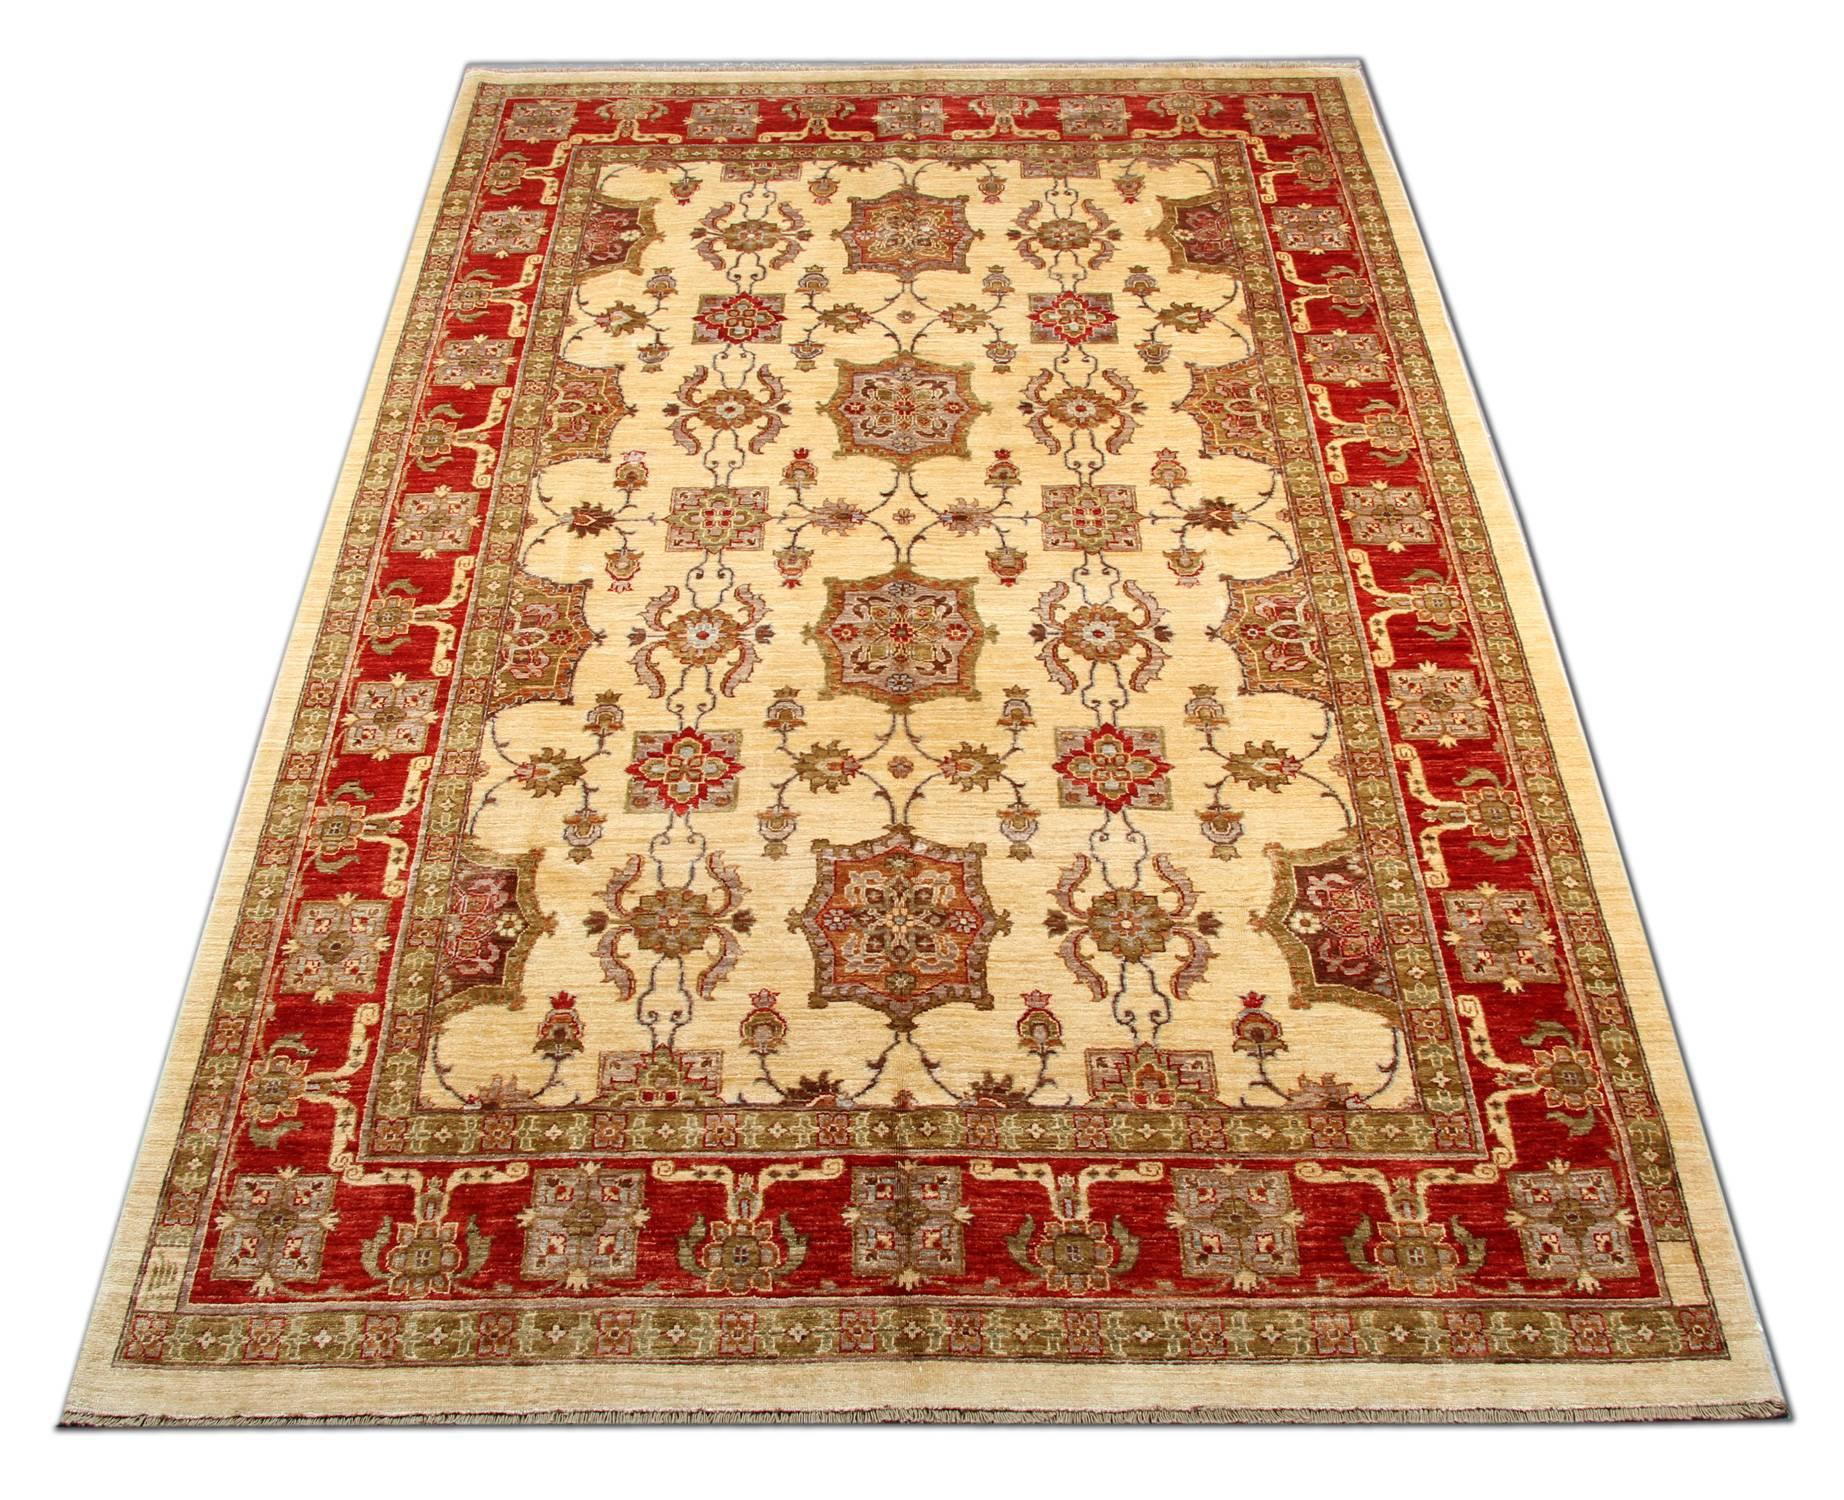 This magnificent gold rug is a Ziegler Sultanabad Handwoven rug made on our looms by our master weavers in Afghanistan. The carpet Oriental rug is handmade with all-natural veg dyes and all handspun wool. The large-scale floral rug design makes